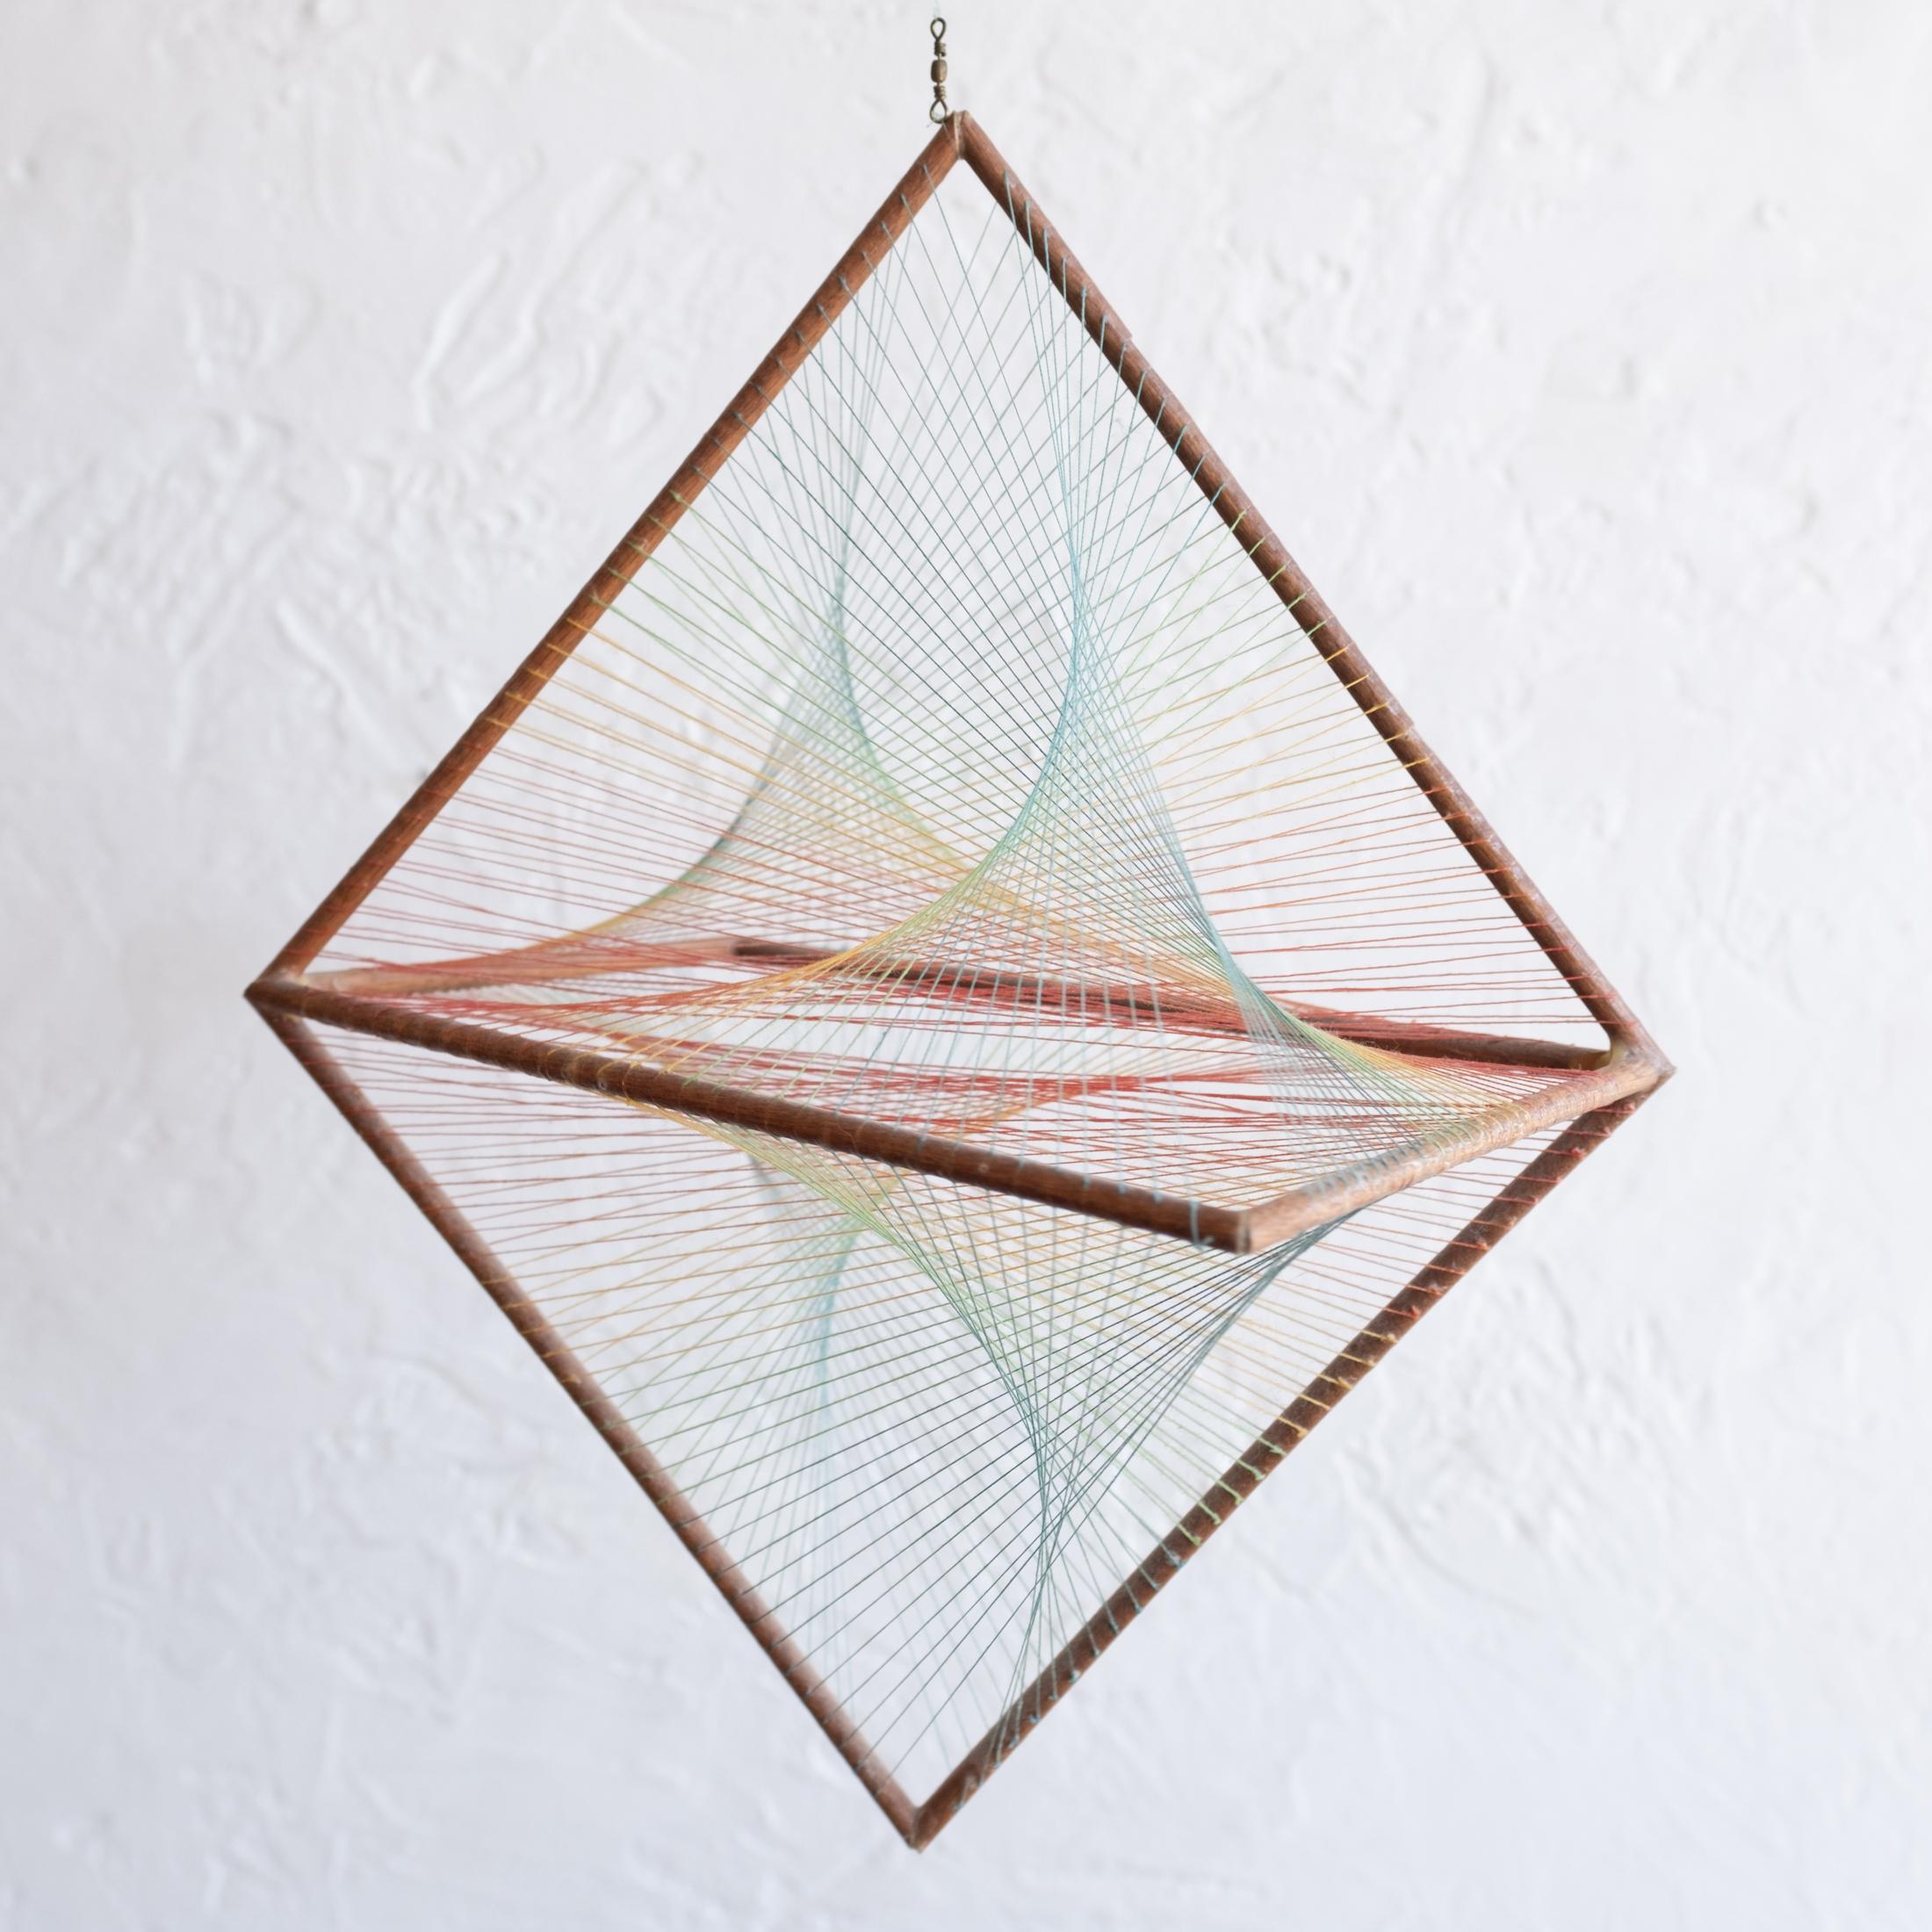 Hanging Mid Century Fiber and Wood Kinetic Sculpture 1960s For Sale 2